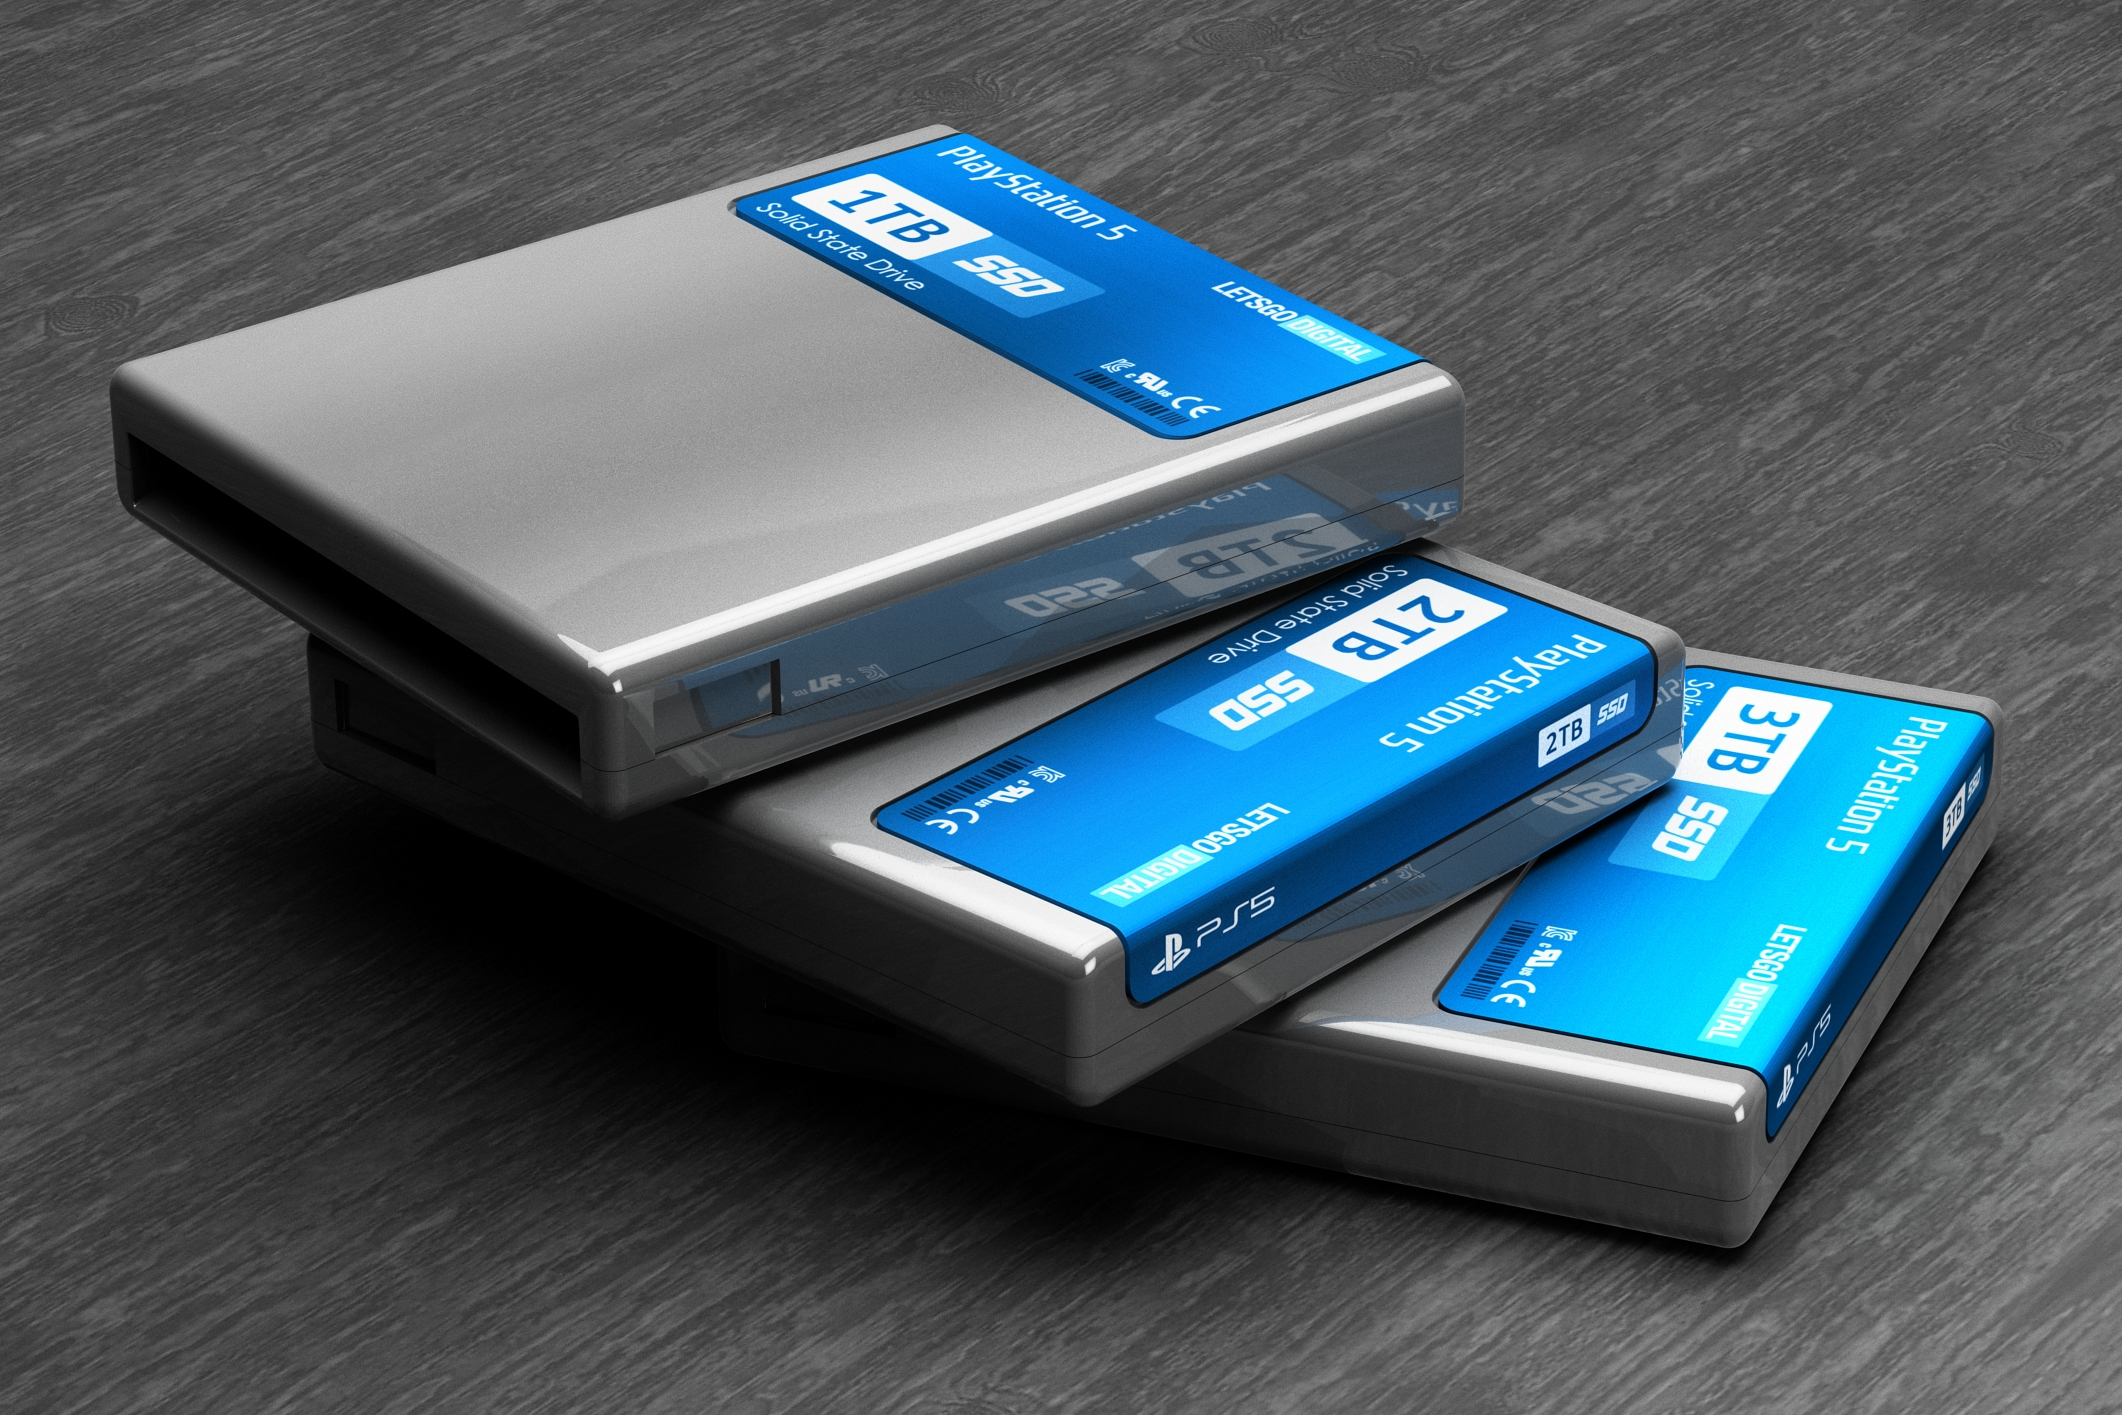 Why You Should Upgrade Your PS5 with Internal and External SSDs